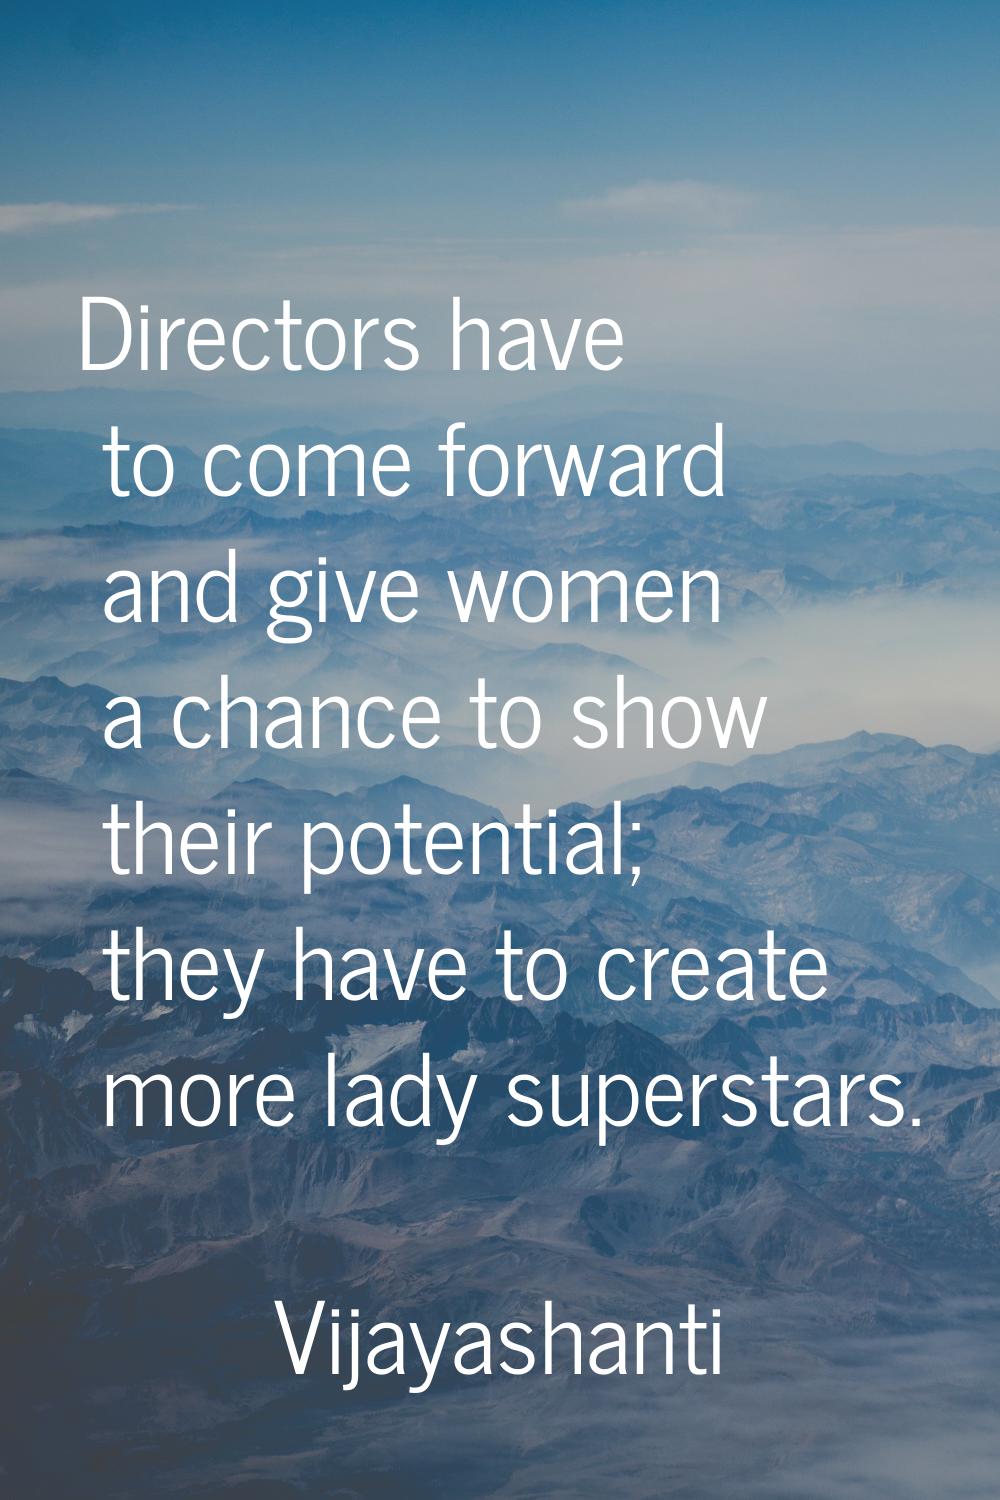 Directors have to come forward and give women a chance to show their potential; they have to create